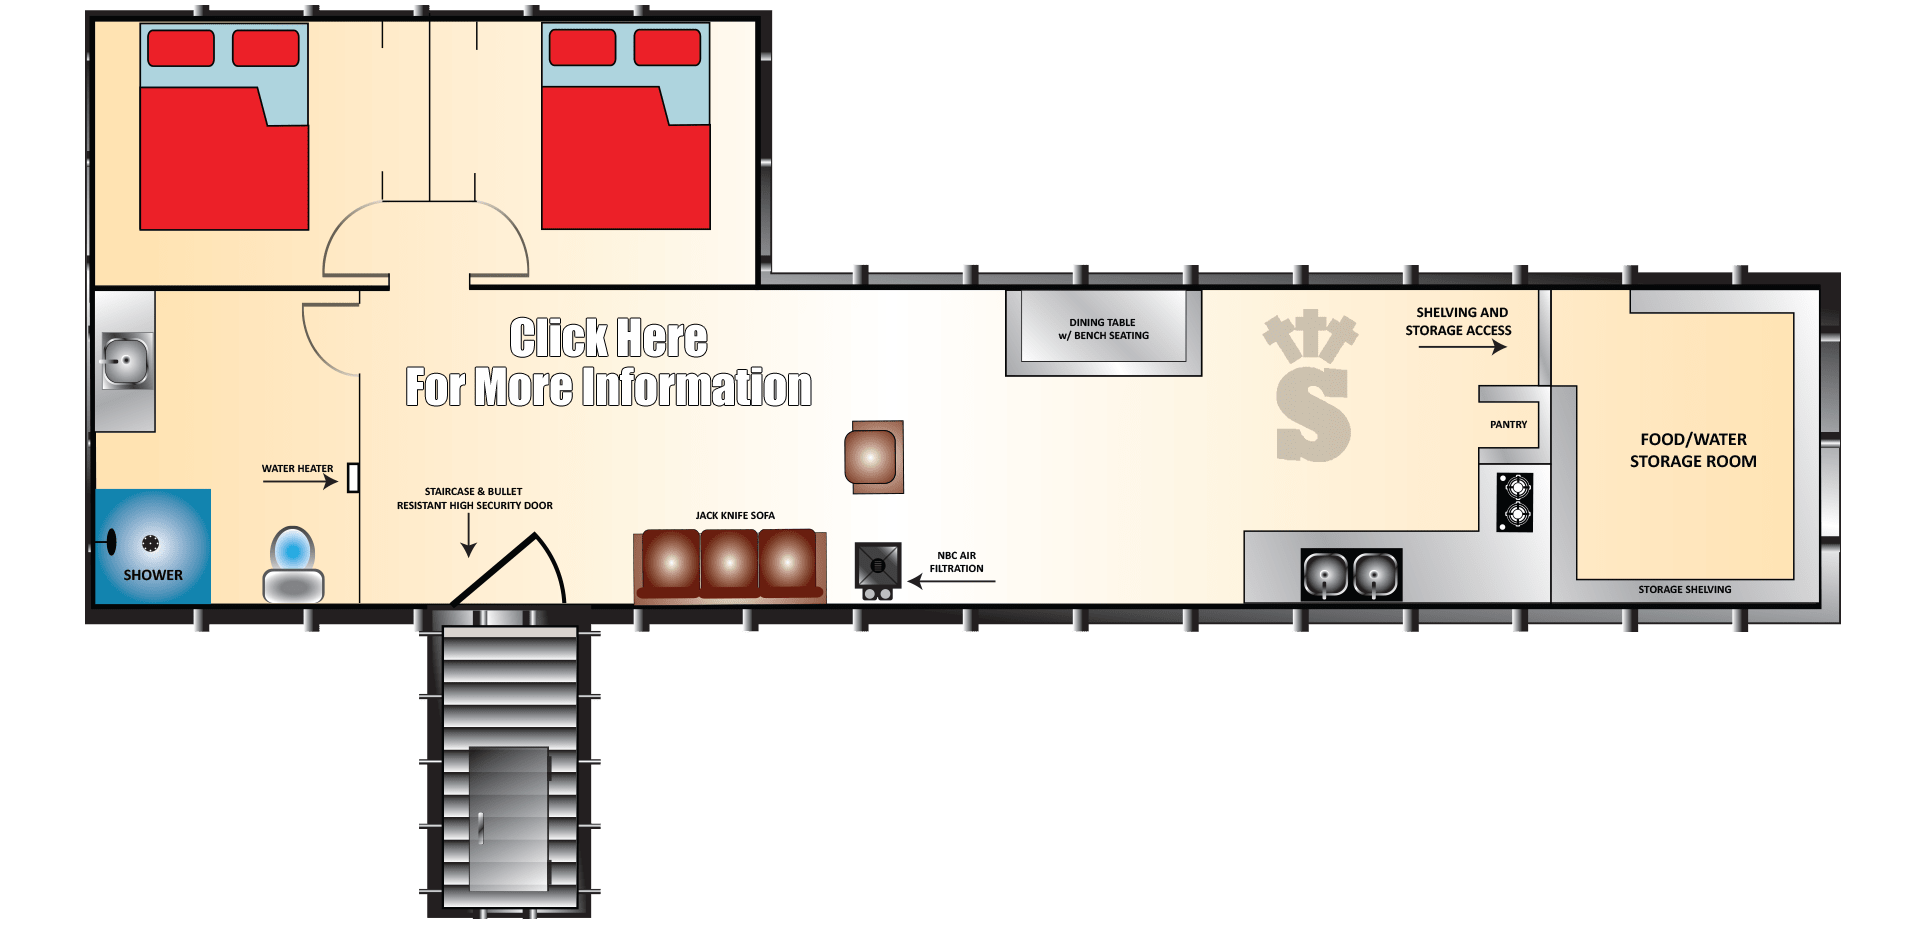 Pricing And Floor Plans Rising S Company